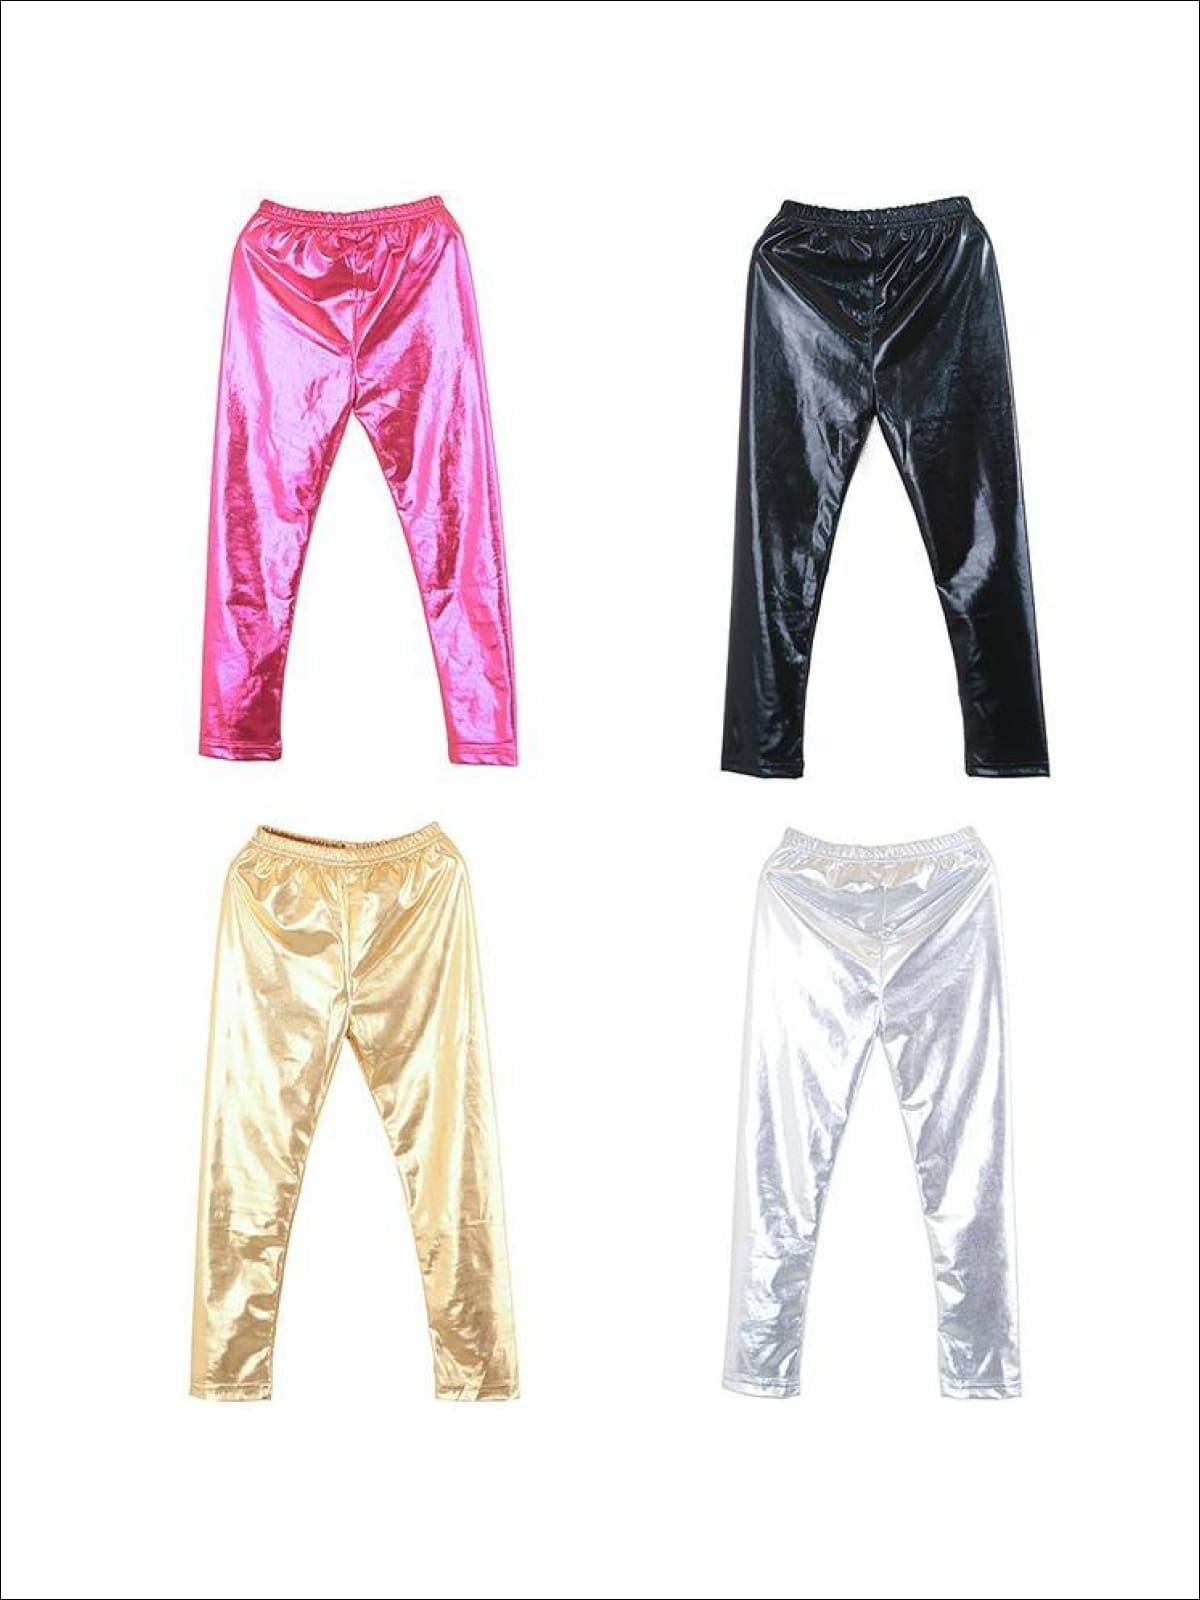 https://cdn.shopify.com/s/files/1/0996/1812/products/girls-shiny-metallic-leggings-4-color-options-19-99-and-under-20-39-40-59-10y12y-6x6y-mia-belle-overseas-fulfillment-baby_482.jpg